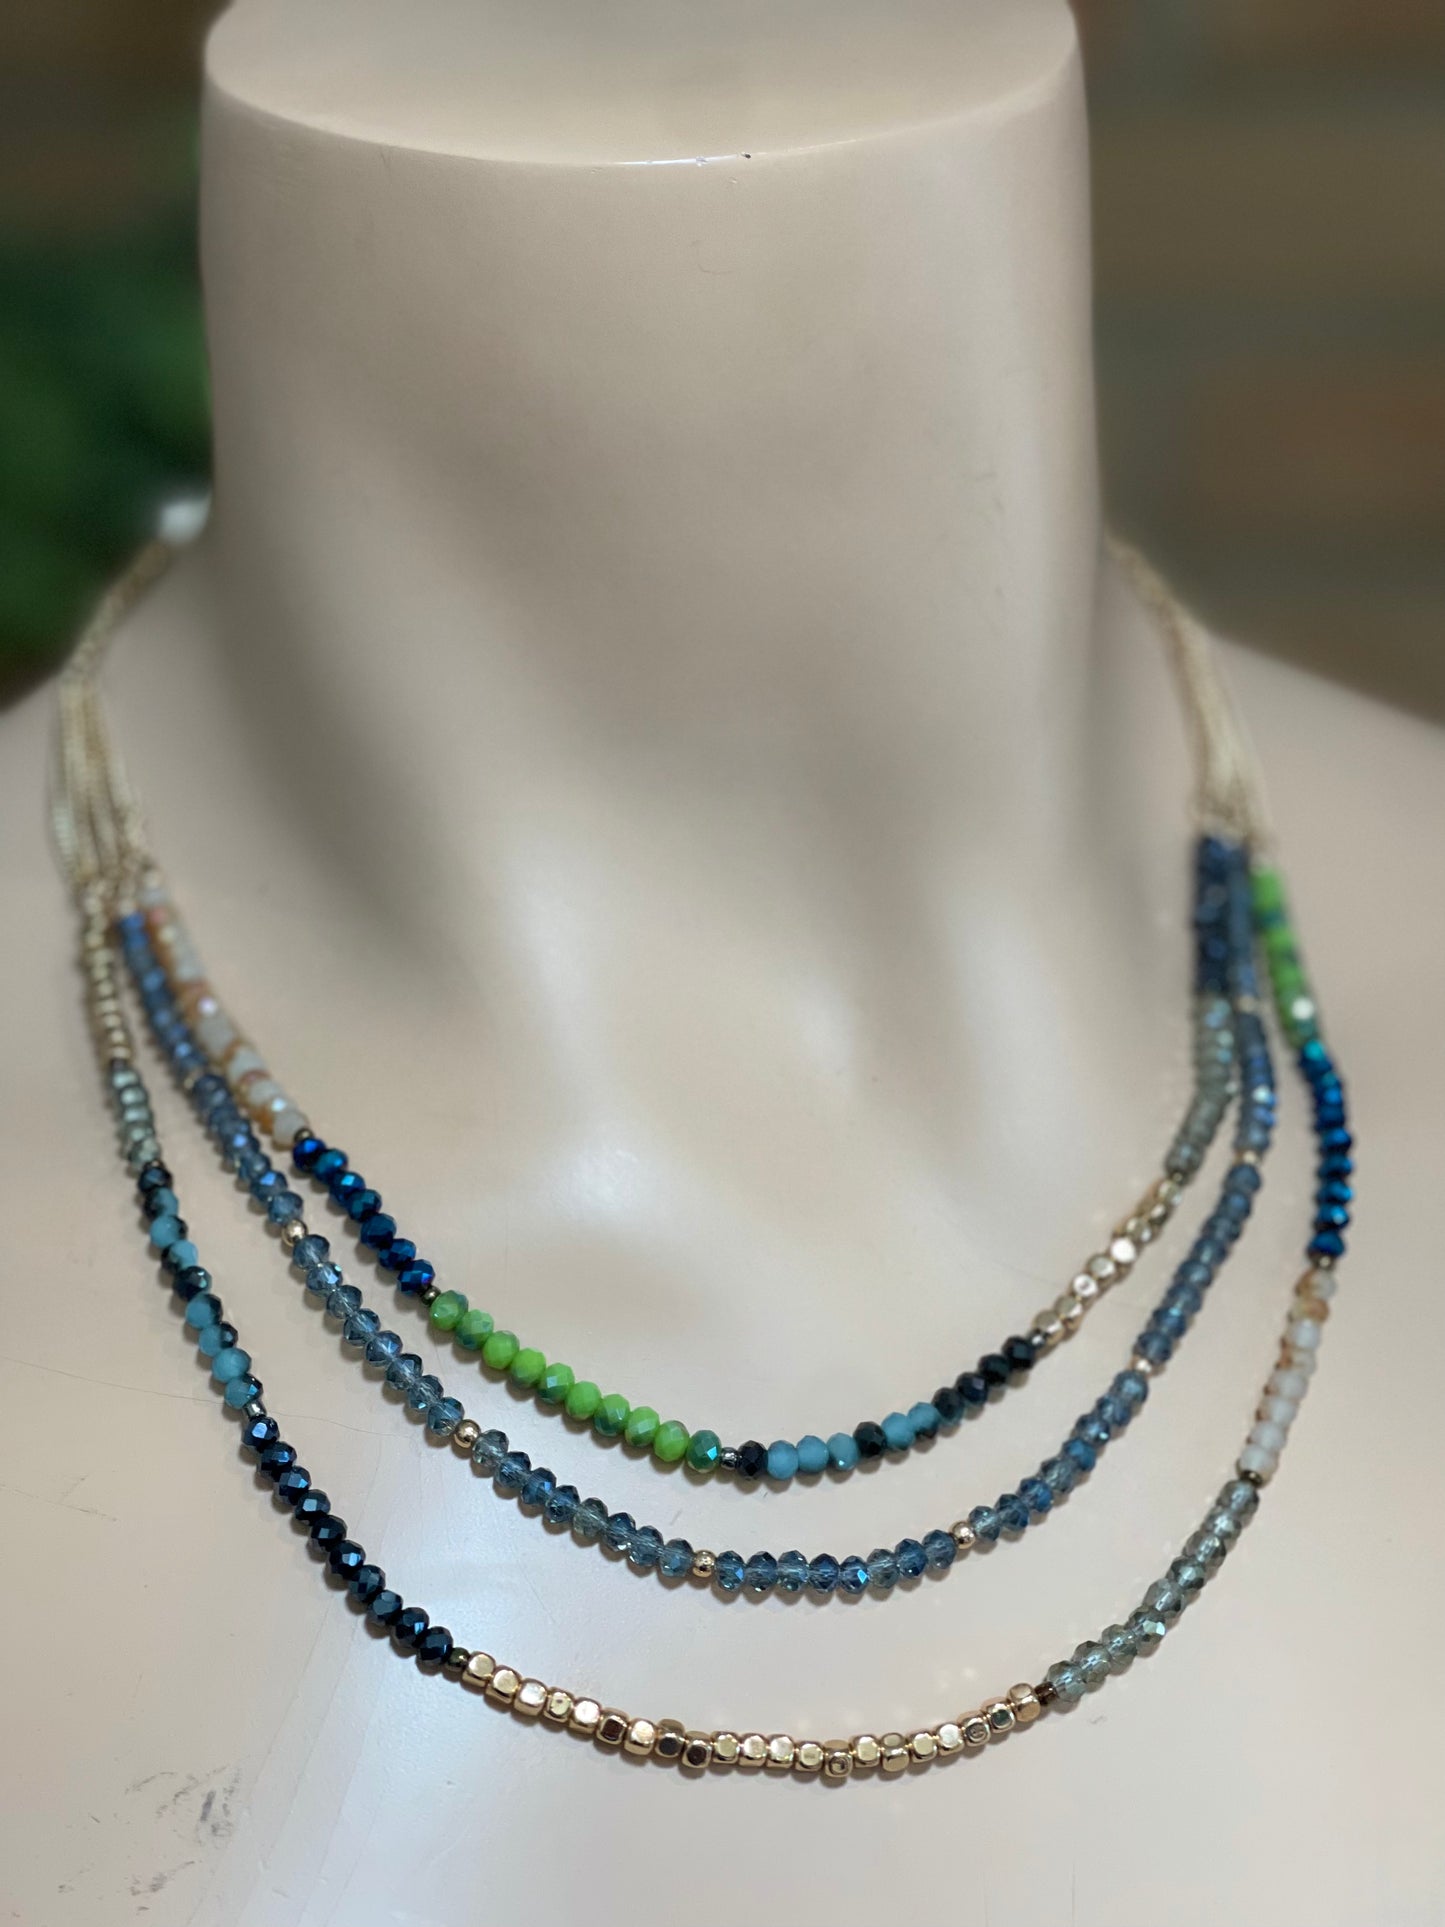 Beads for Days Necklace Set